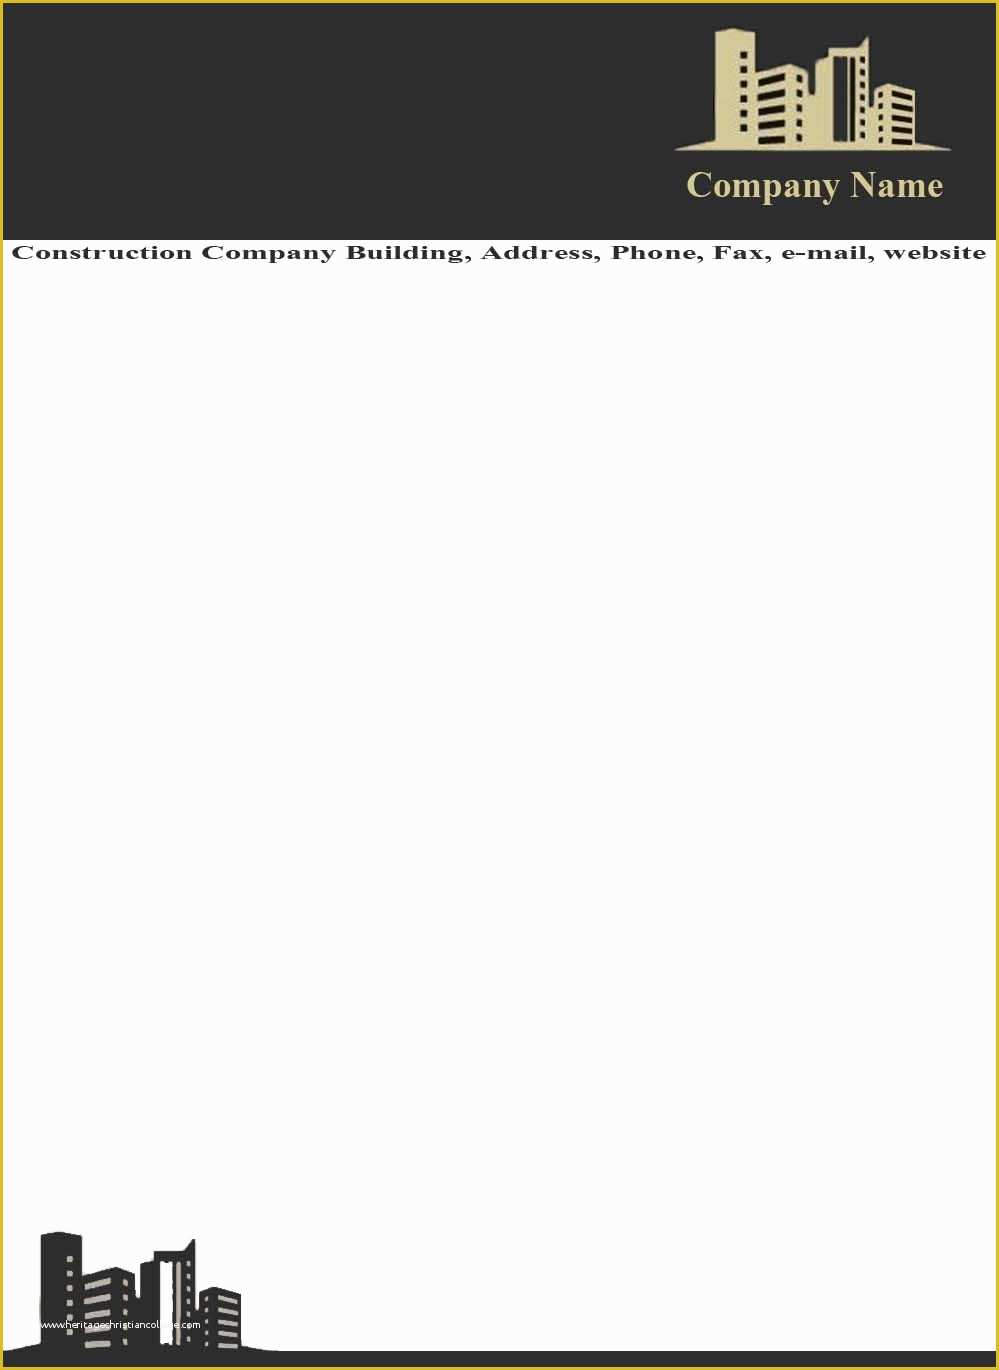 Construction Company Template Free Of Letterhead Templates Construction Pany 1837trnj